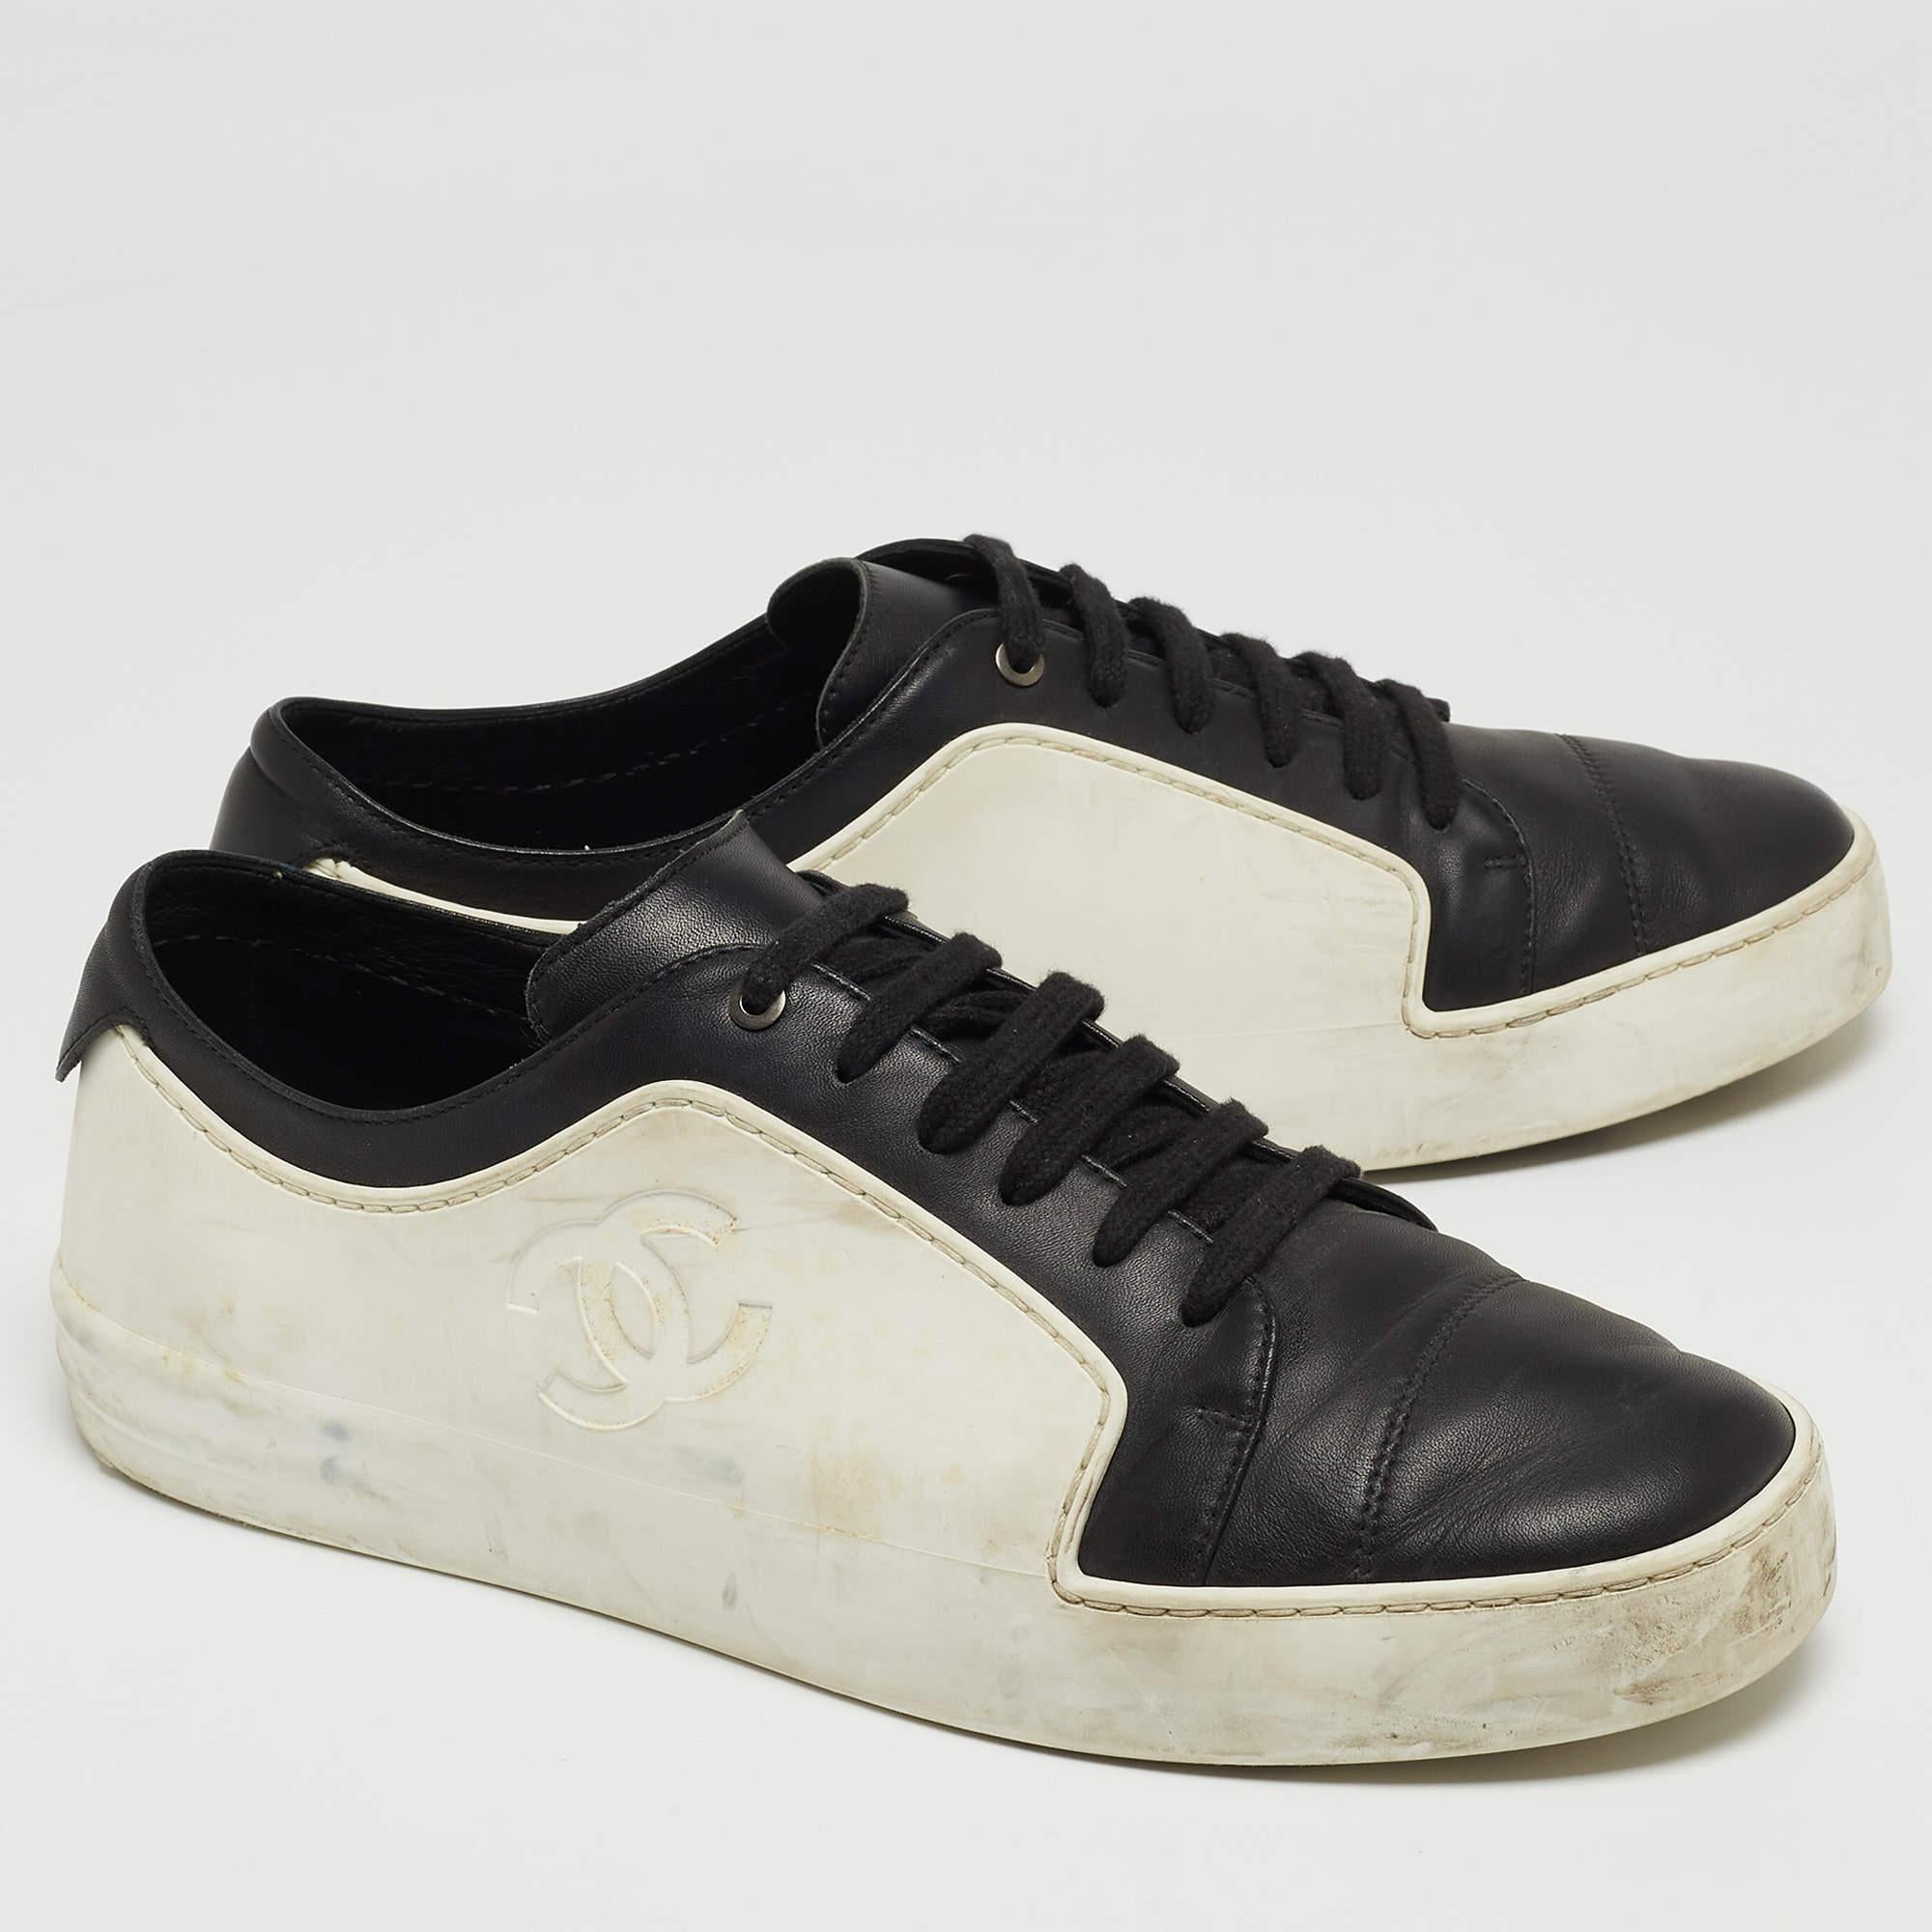 Chanel Black/White Leather and Rubber CC Low Top Sneakers Size 40 In Fair Condition For Sale In Dubai, Al Qouz 2